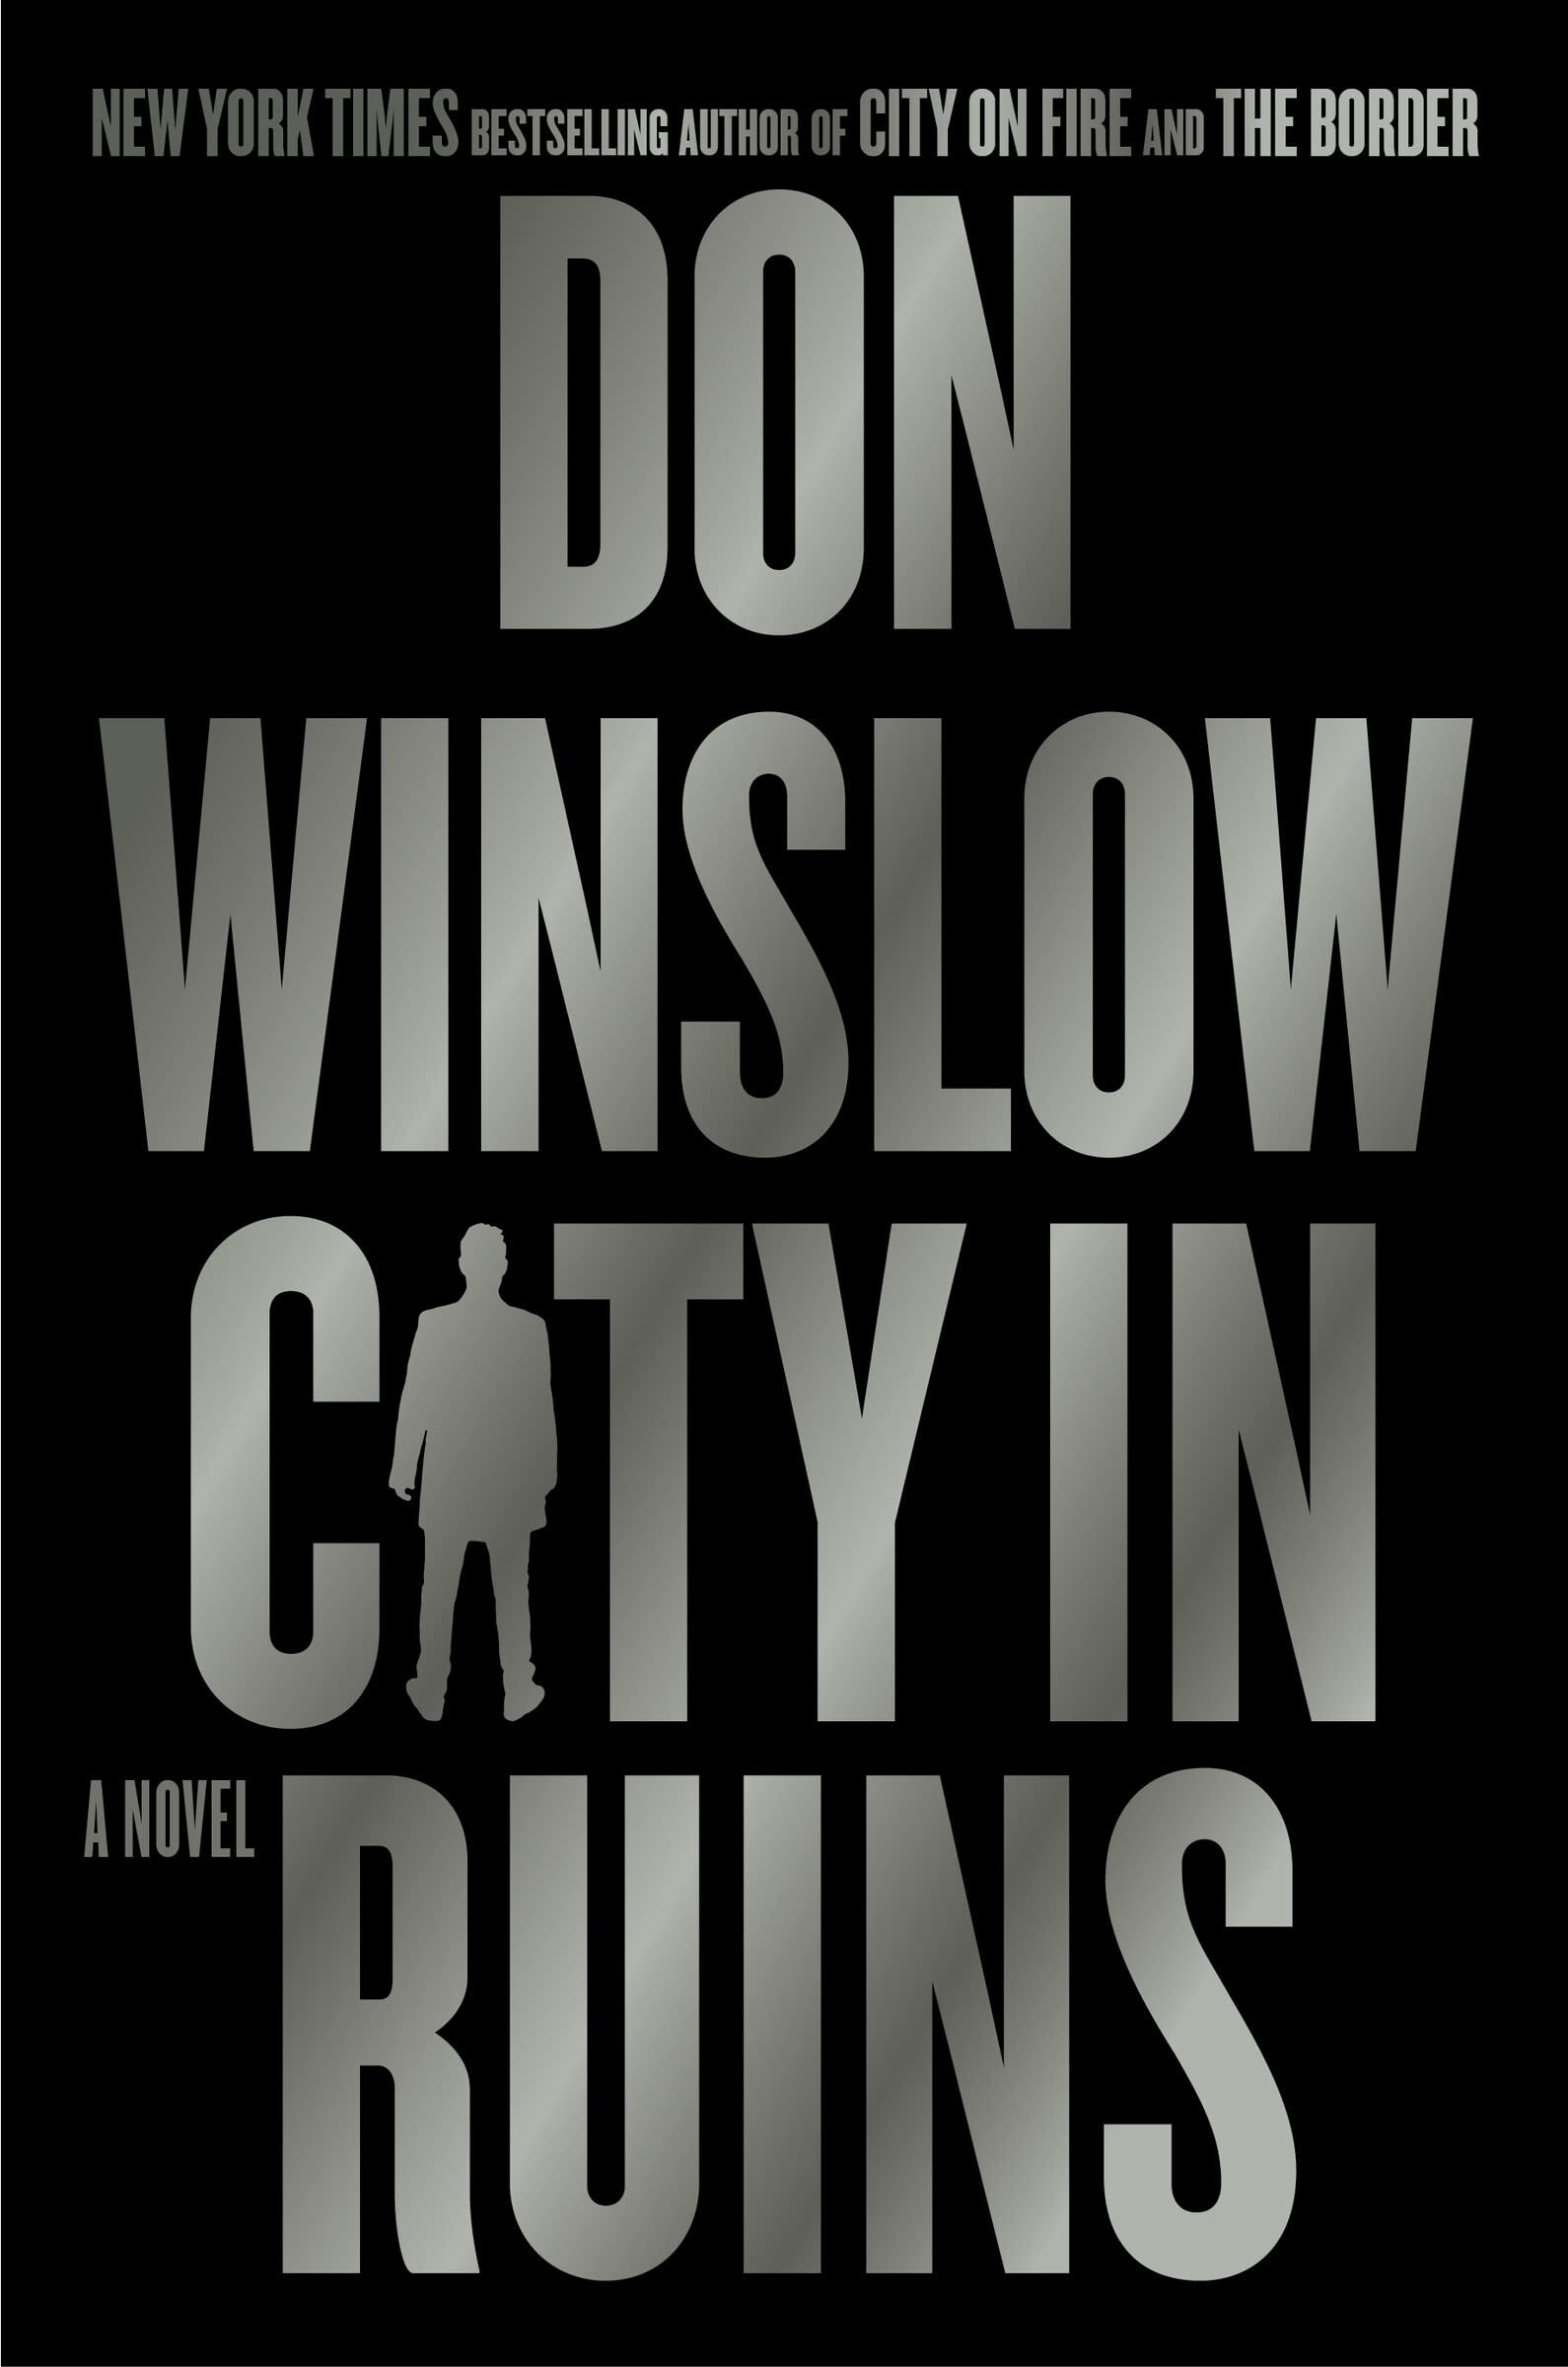 City In Ruins The Danny Ryan Trilogy #3)